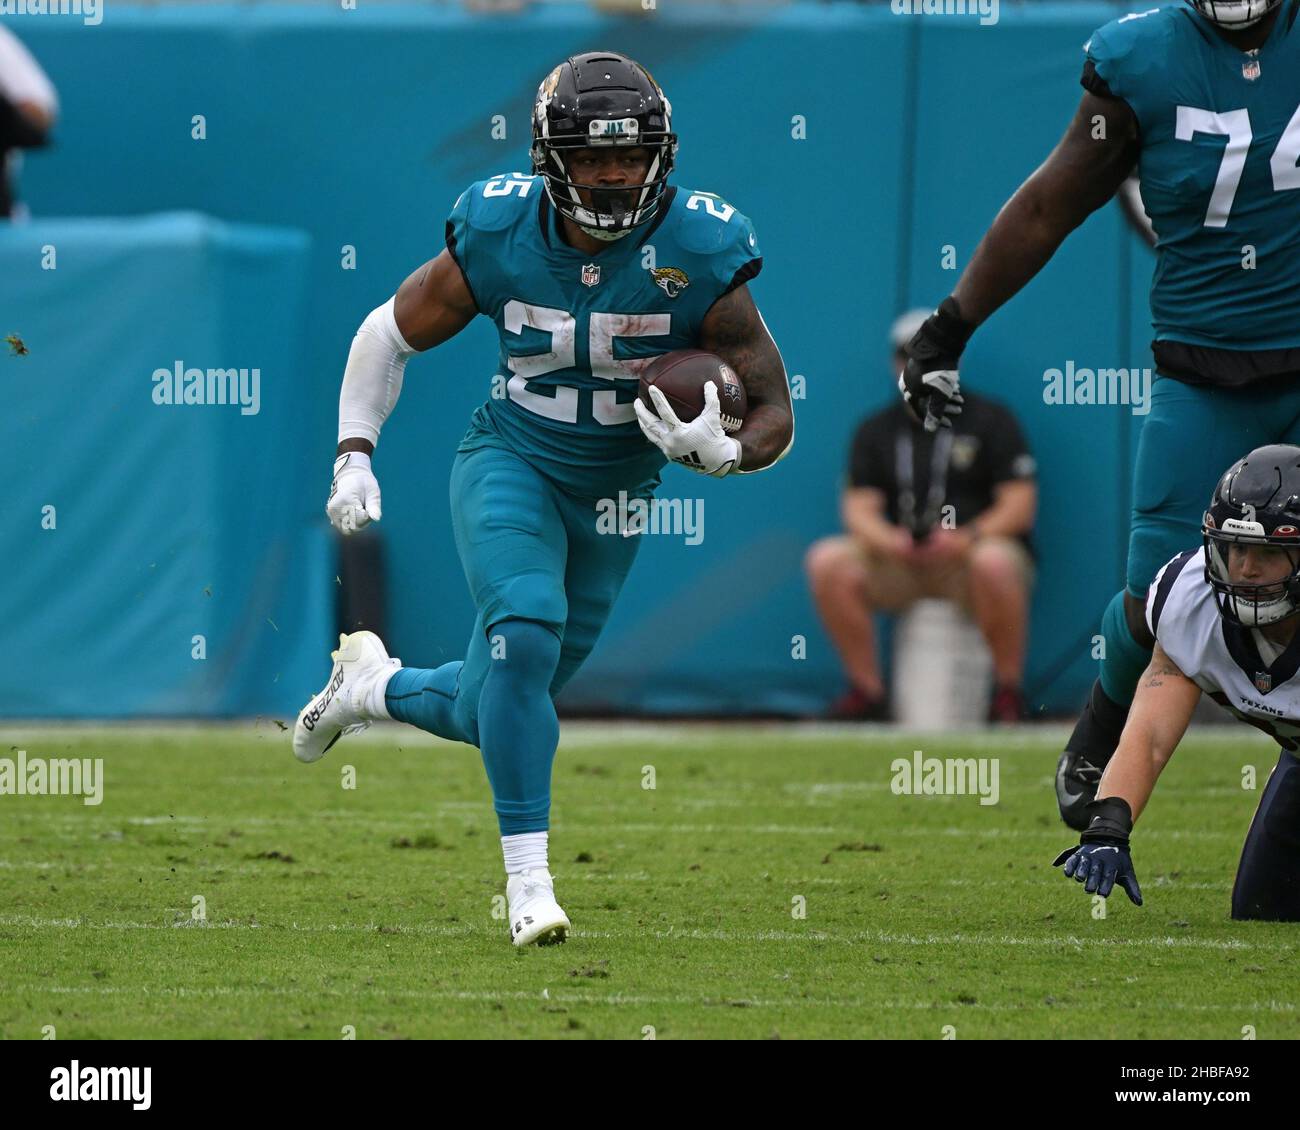 Jacksonville, United States. 19th Dec, 2021. Running Back James Robinson runs for yardage as the Texans compete against the Jaguars at the TIAA Bank Field in Jacksonville, Florida on Sunday, December 19, 2021. The Texans defeated the Jaguars 30 - 16. Photo by Joe Marino/UPI Credit: UPI/Alamy Live News Stock Photo